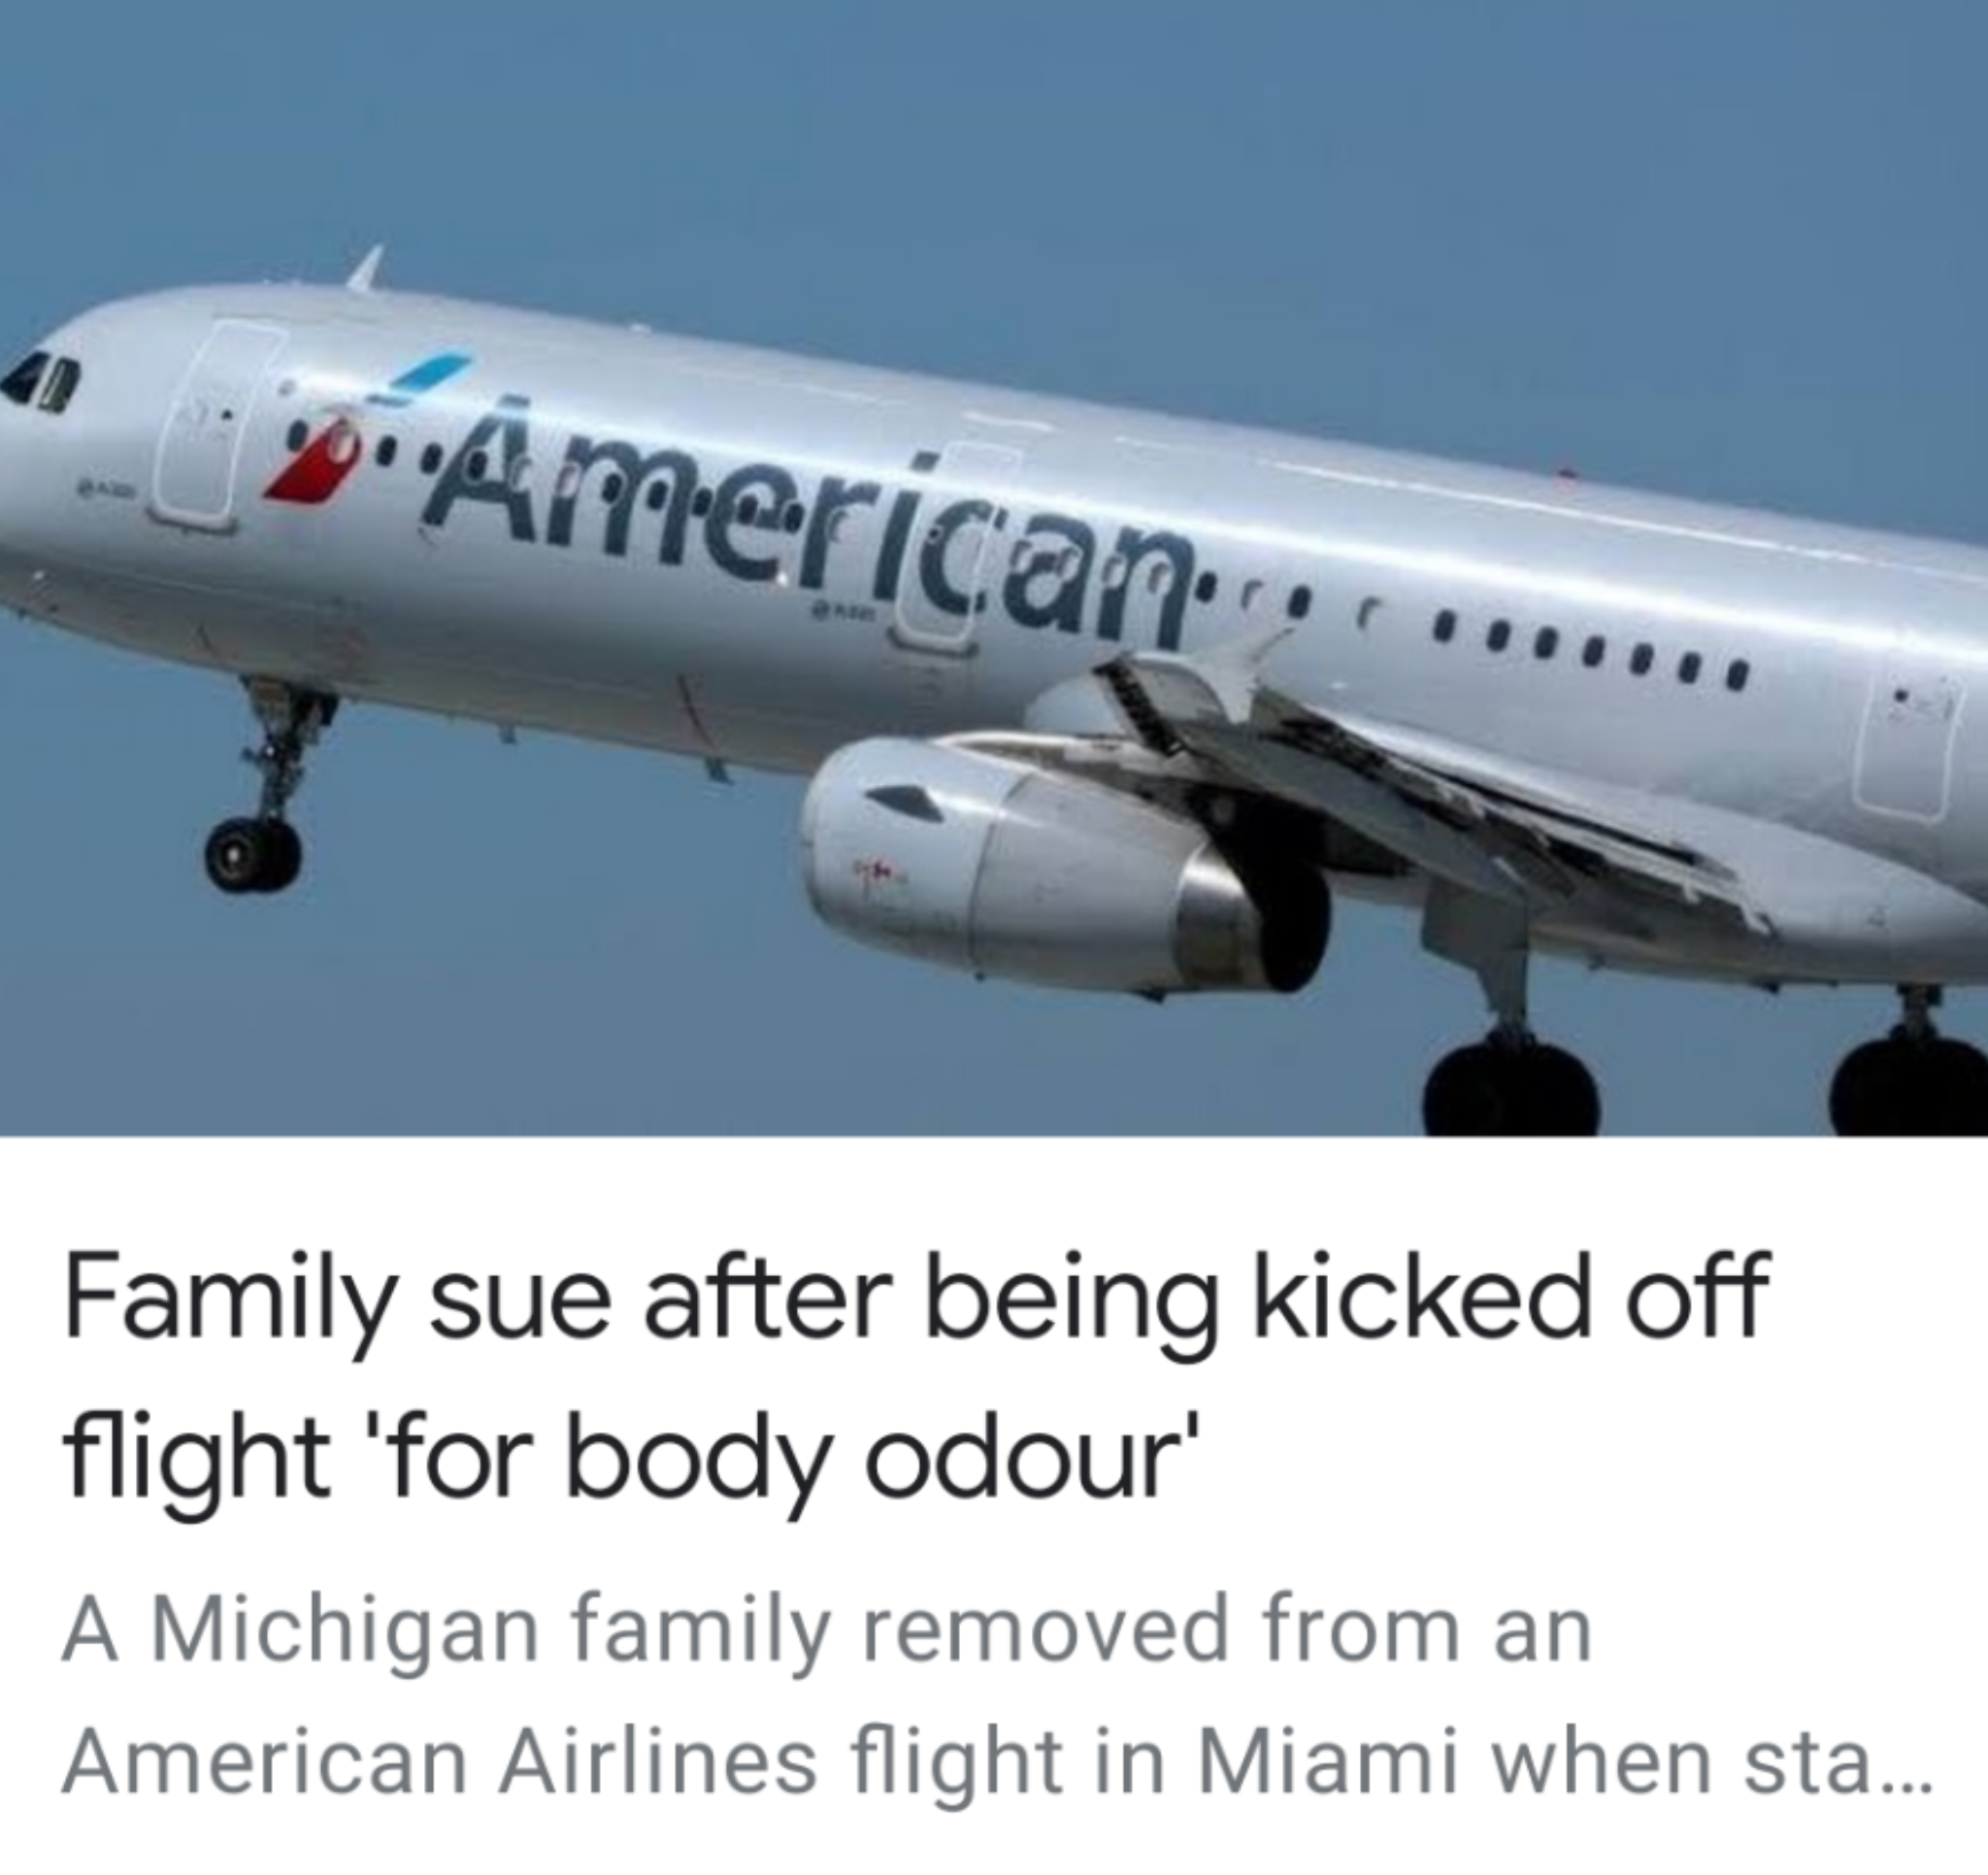 airline - M yAmericana....... Family sue after being kicked off flight 'for body odour' A Michigan family removed from an American Airlines flight in Miami when sta...